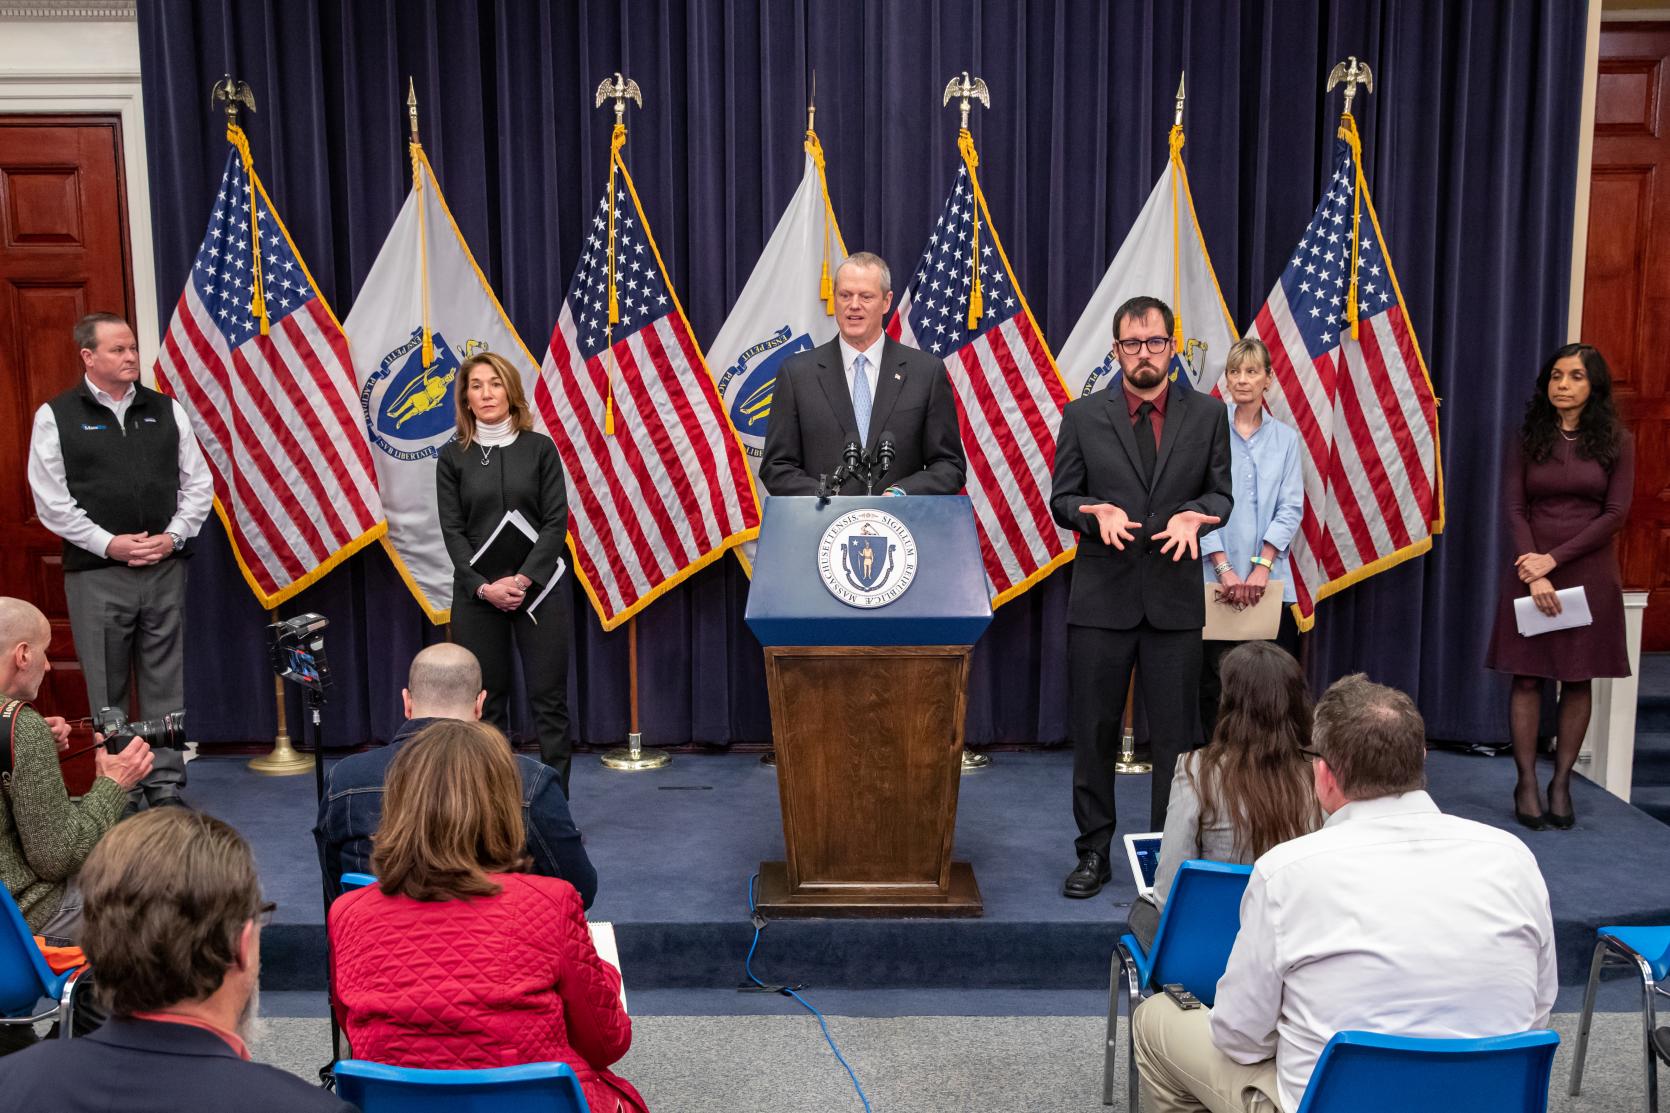 Baker-Polito Administration Announces New Health Care Resources, Small Business Relief, Other Efforts To Support COVID-19 Response